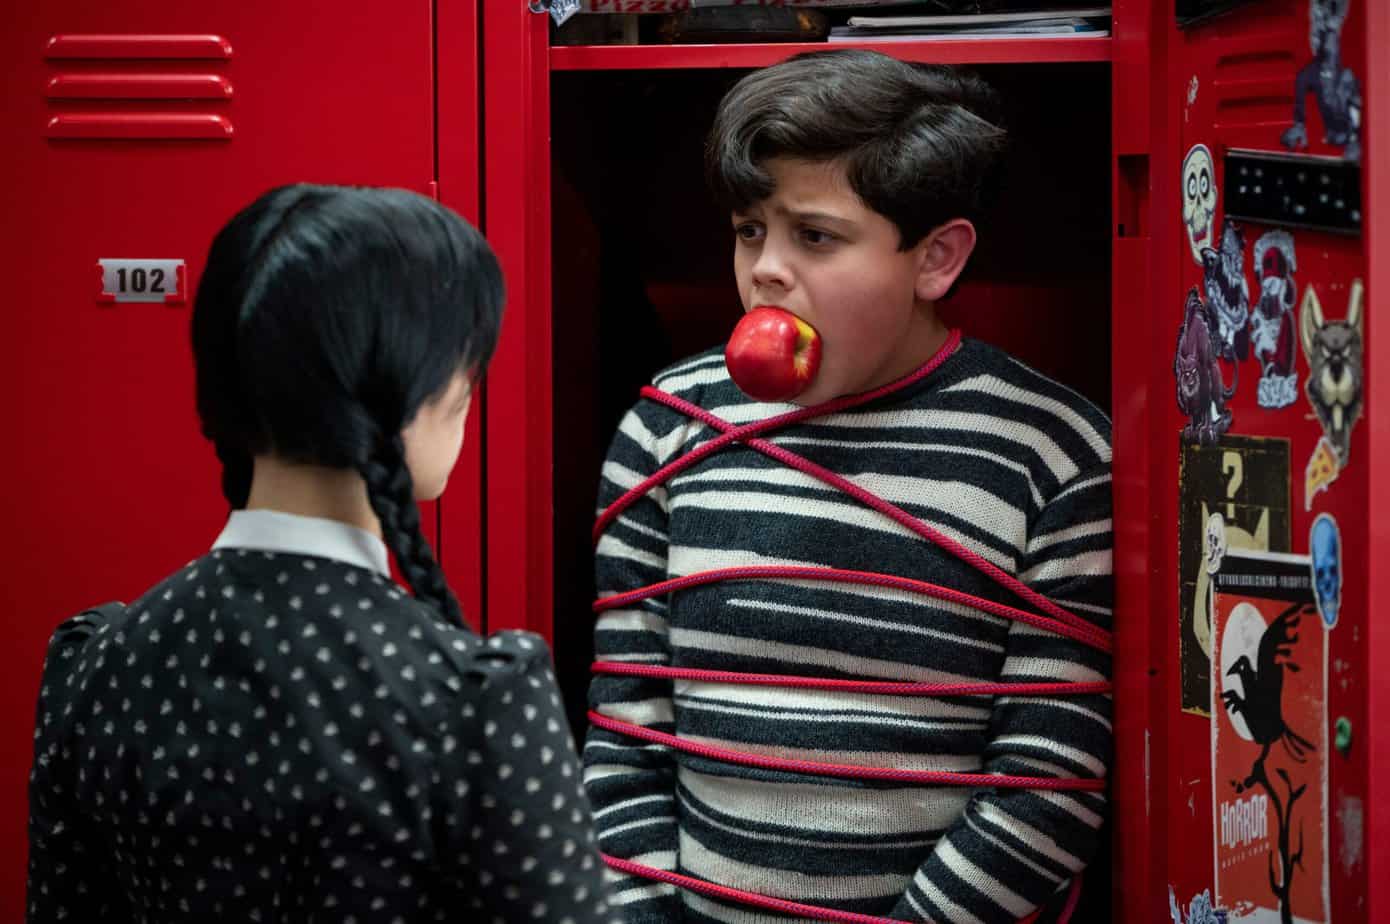 addams family quotes from Wednesday series on Netflix. Boy tied up in locker with an apple in mouth, girl looking at him.